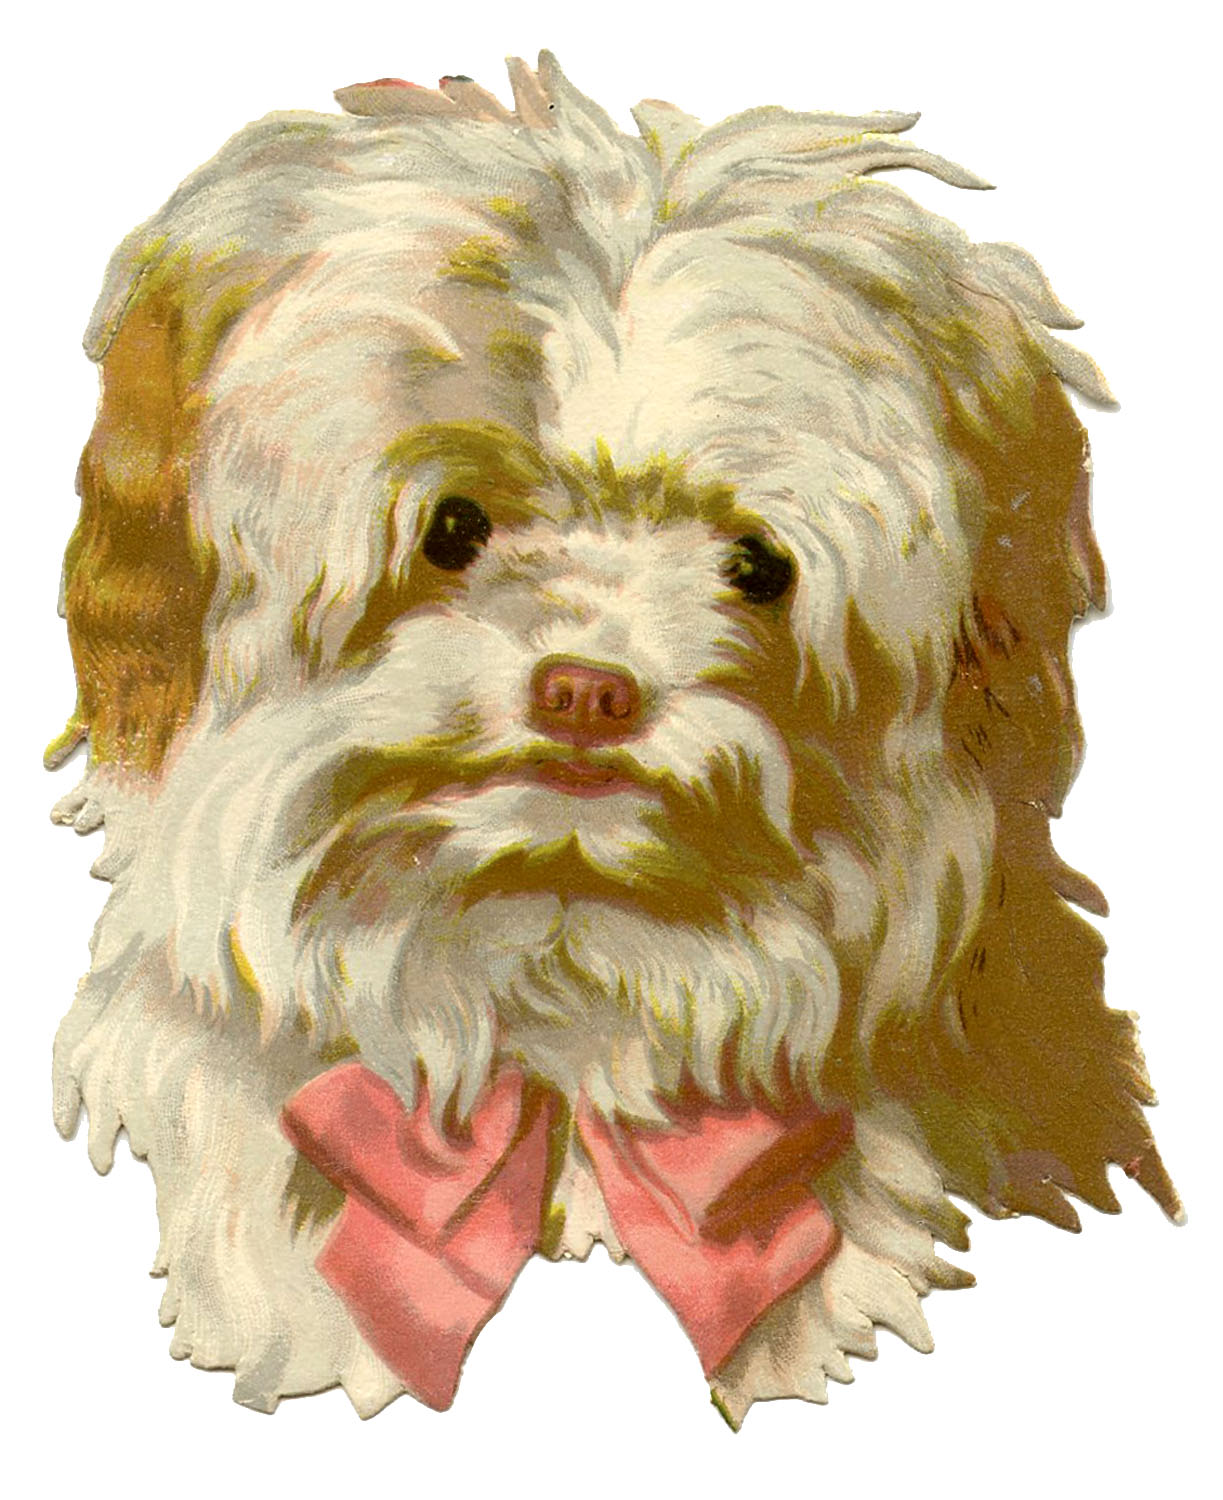 http://thegraphicsfairy.com/wp-content/uploads/2013/06/Vintage-Dog-Image-Scruffy-GraphicsFairy.jpg